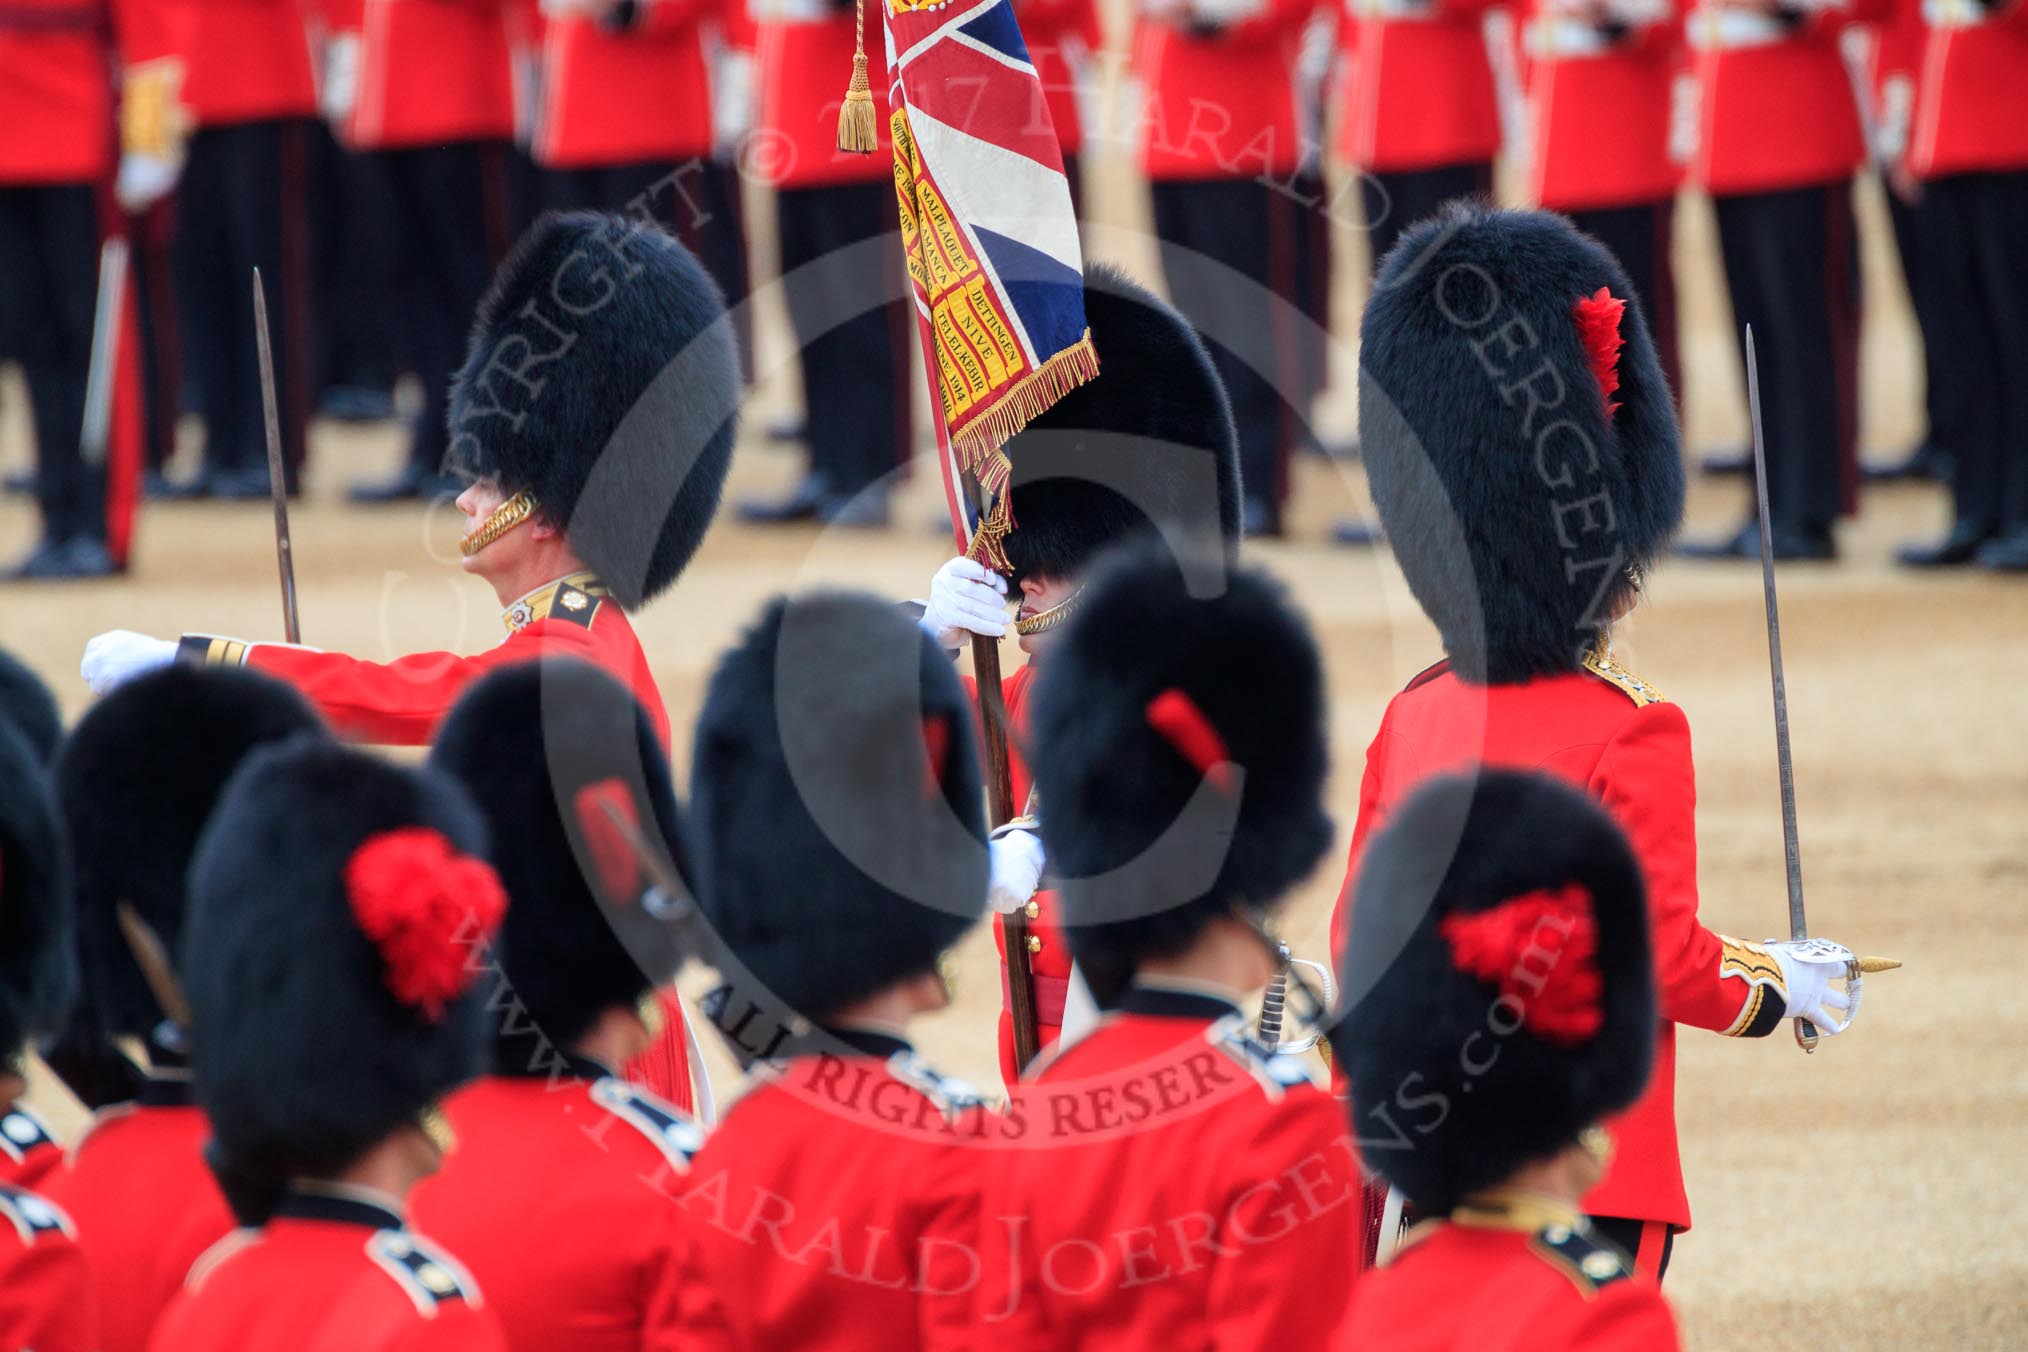 during The Colonel's Review {iptcyear4} (final rehearsal for Trooping the Colour, The Queen's Birthday Parade)  at Horse Guards Parade, Westminster, London, 2 June 2018, 11:21.